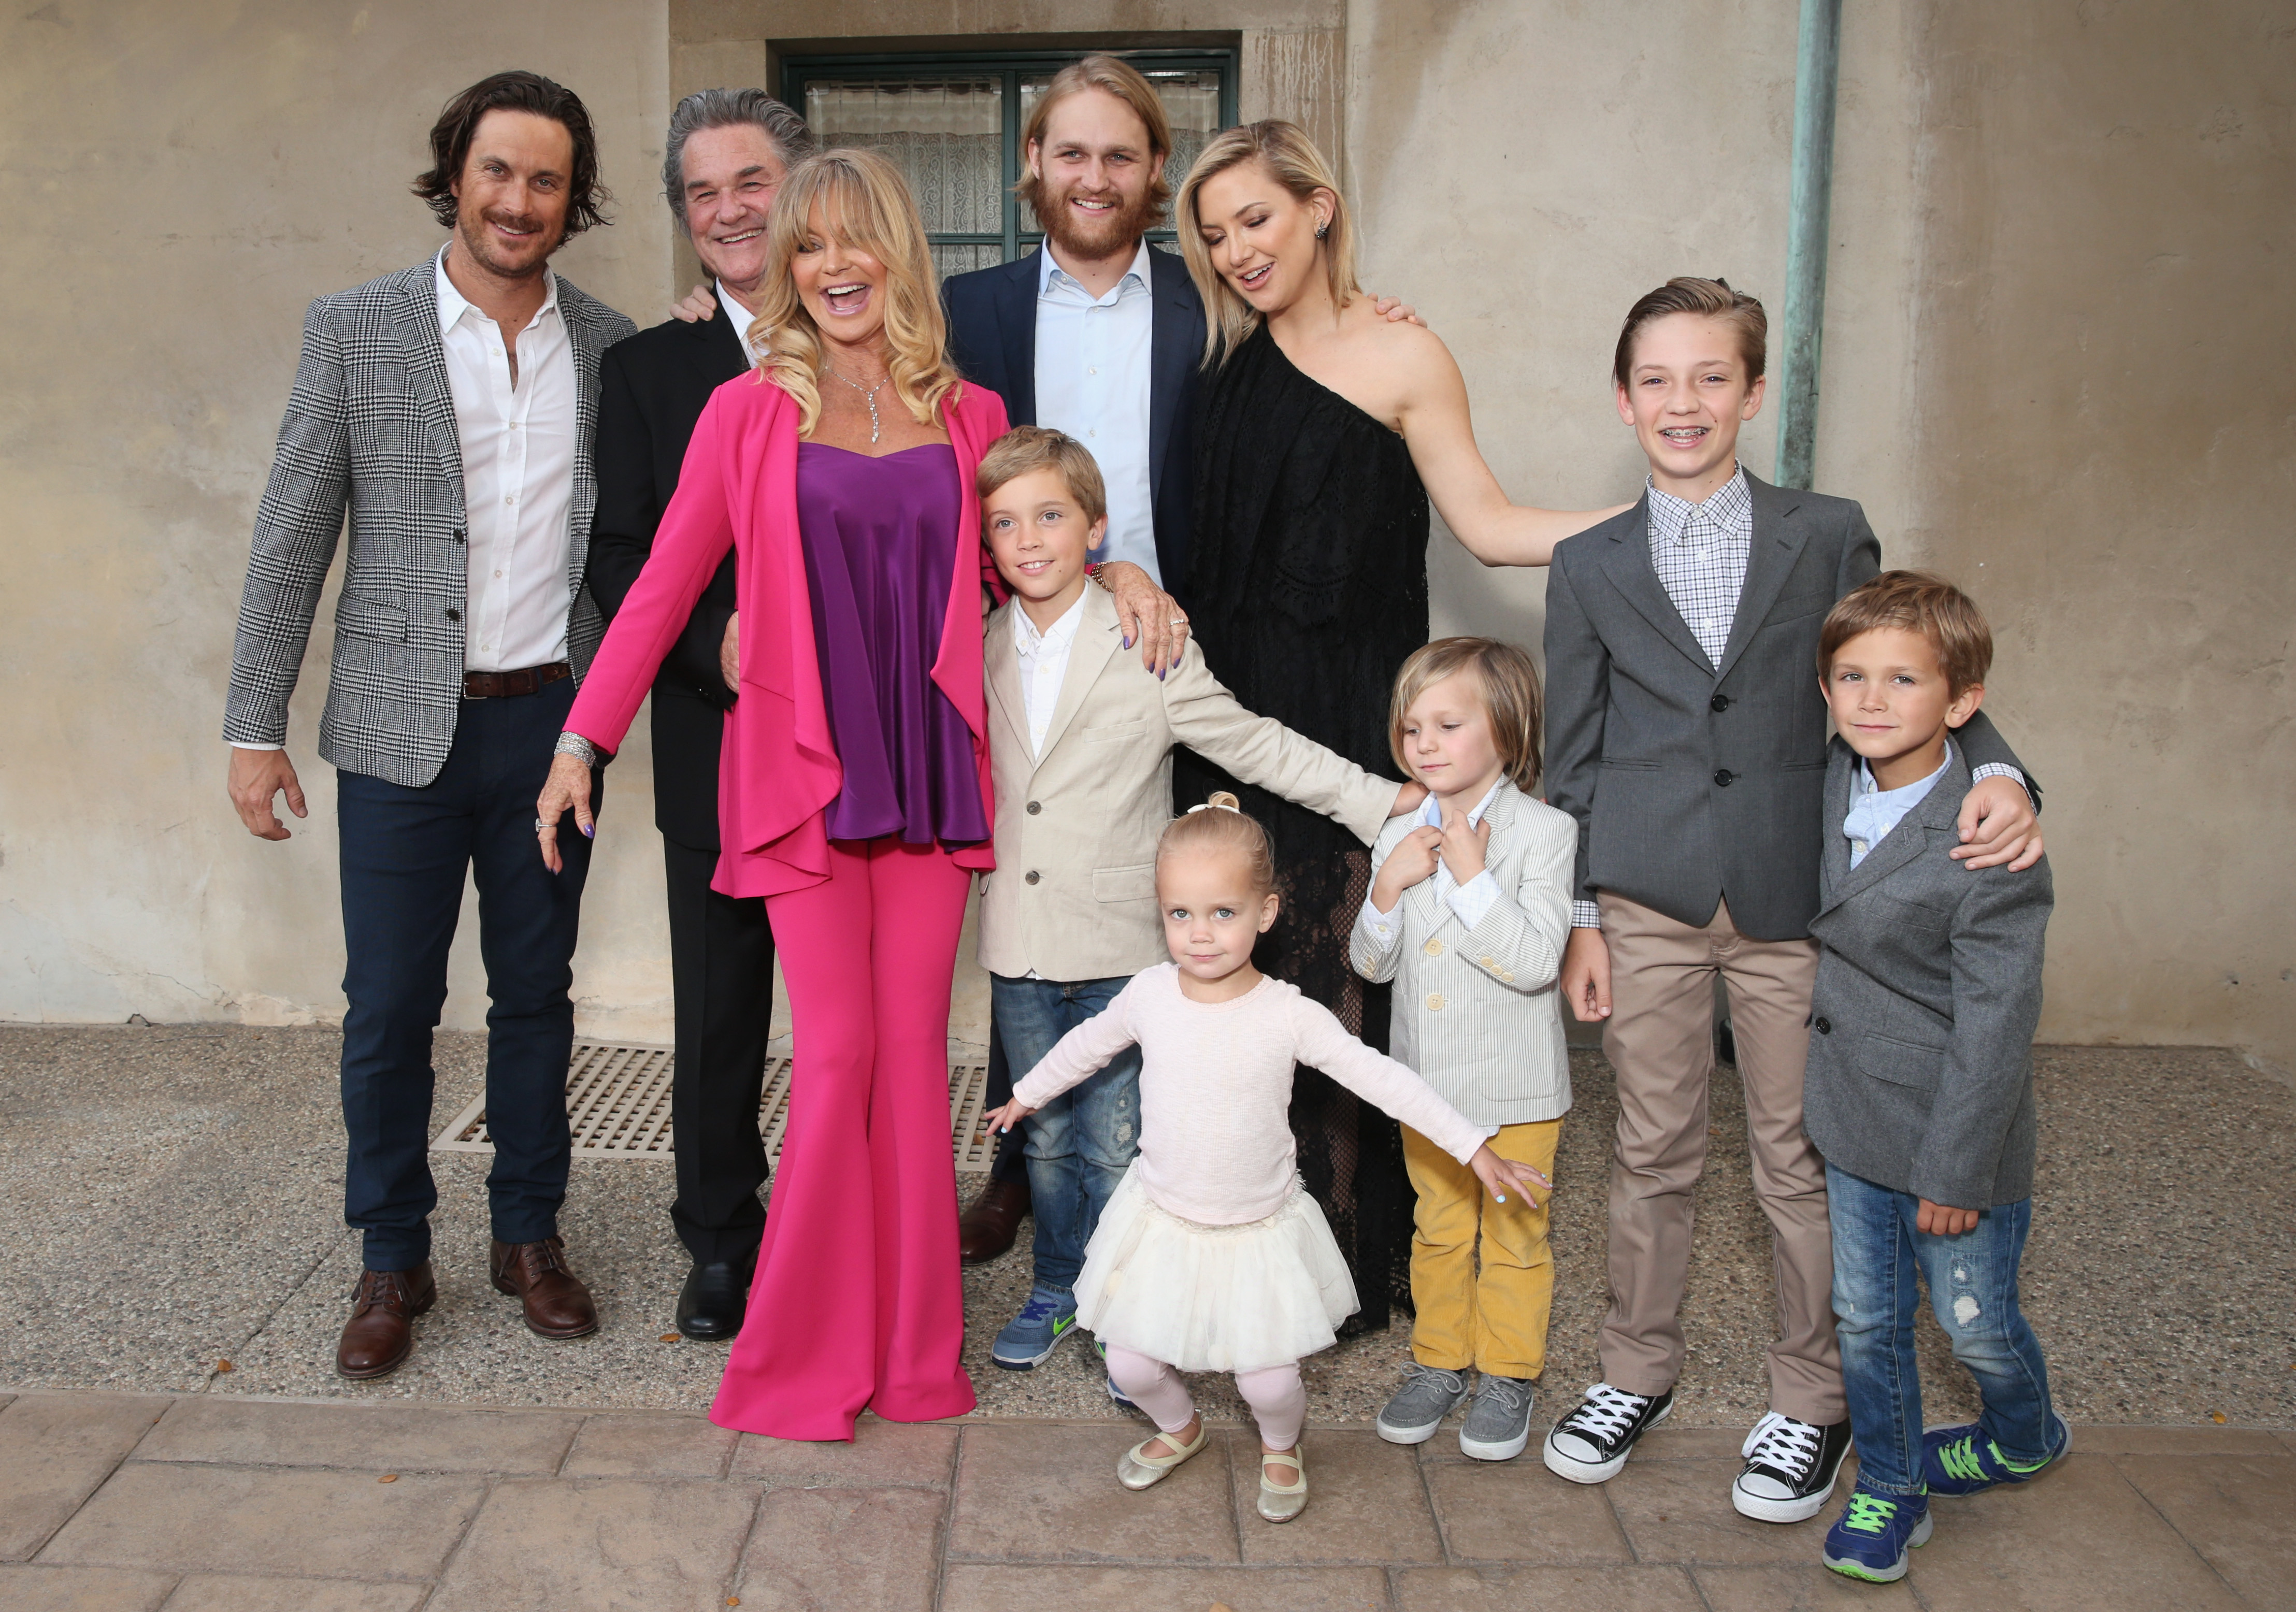 Oliver Hudson, Kurt Russell, Goldie Hawn, Wyatt Russell and Kate Hudson with kids Ryder Robinson, Wilder Hudson, Bodhi Hudson, Rio Hudson and Bingham Bellamy on May 6, 2016 in Beverly Hills, California. | Source: Getty Images